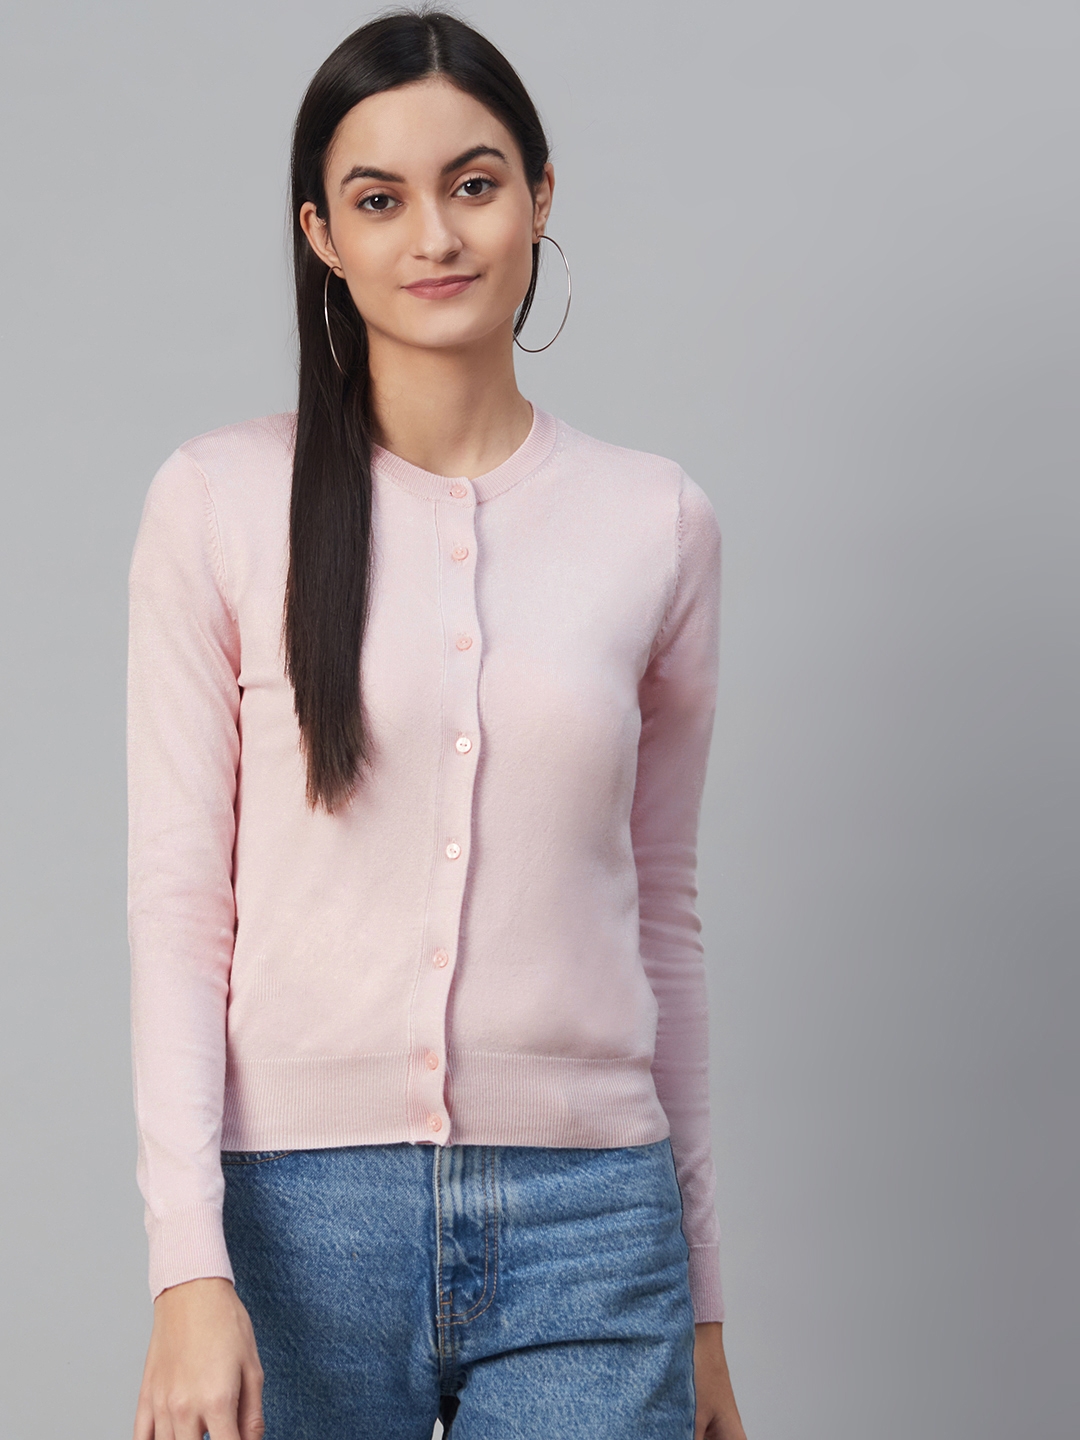 Marks & Spencer Women Pink Solid Cardigan Sweater